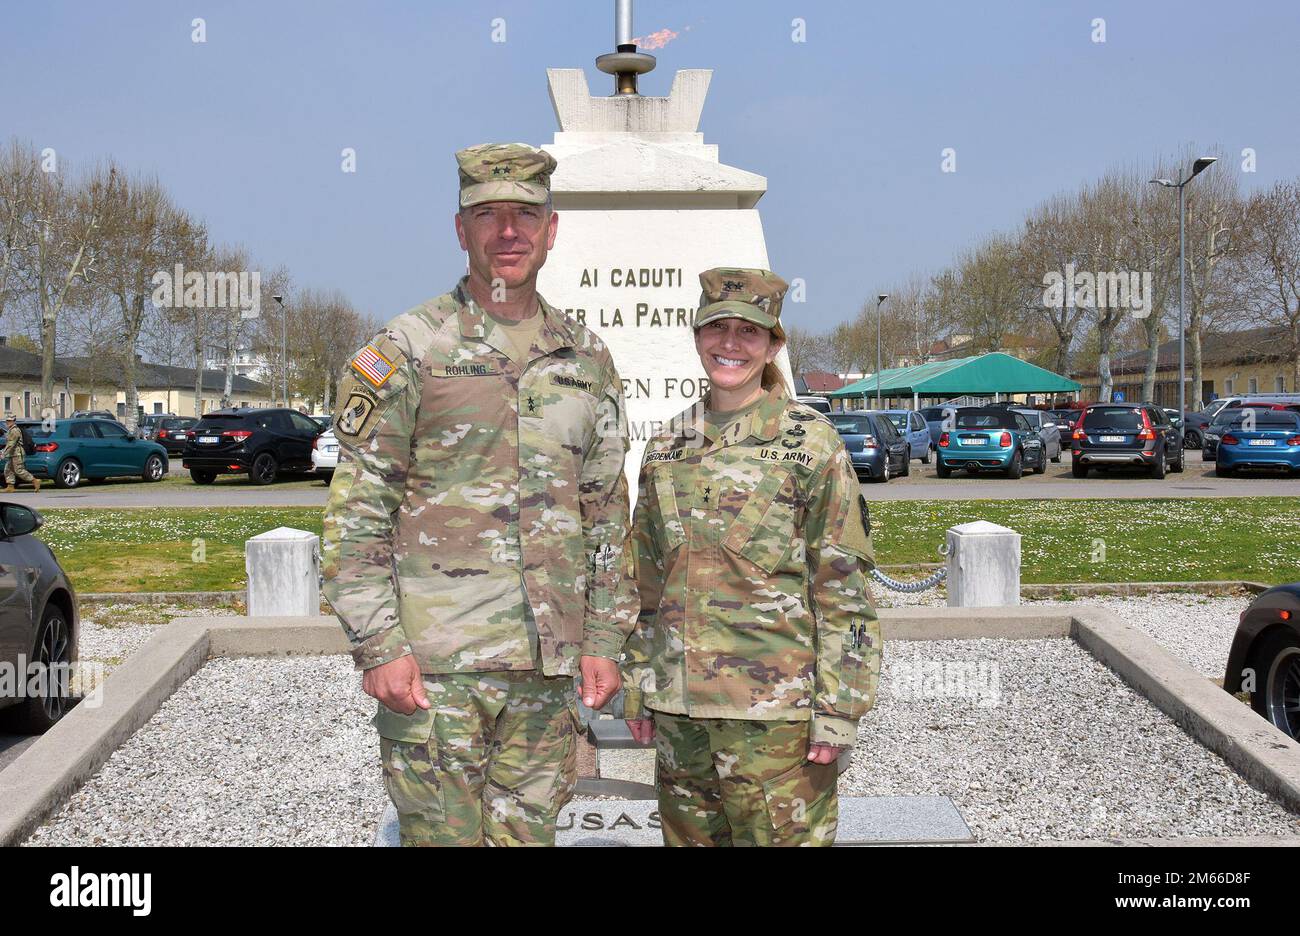 Maj. Gen. Michele Bredenkamp, the U.S. Army Intelligence and Security Command (INSCOM) commanding general, right, and Maj. Gen. Andrew M. Rohling, the U.S. Army Southern European Task Force, Africa commander, meet in front of the Eternal Flame memorial on Caserma Ederle during Bredenkamp’s visit to Vicenza, Italy, Apr. 7, 2022. Stock Photo